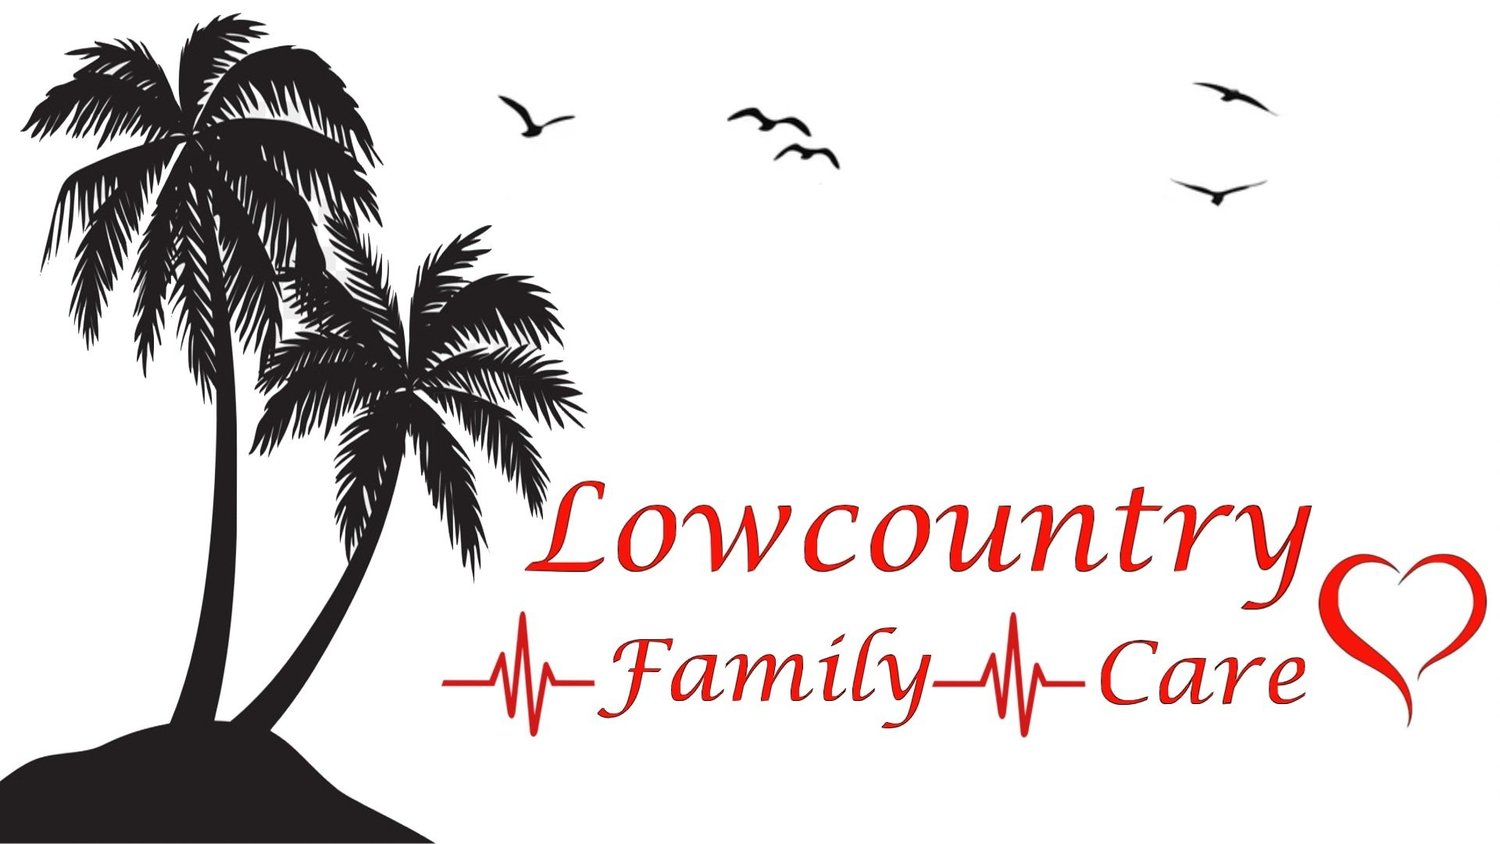 Lowcountry Family Care